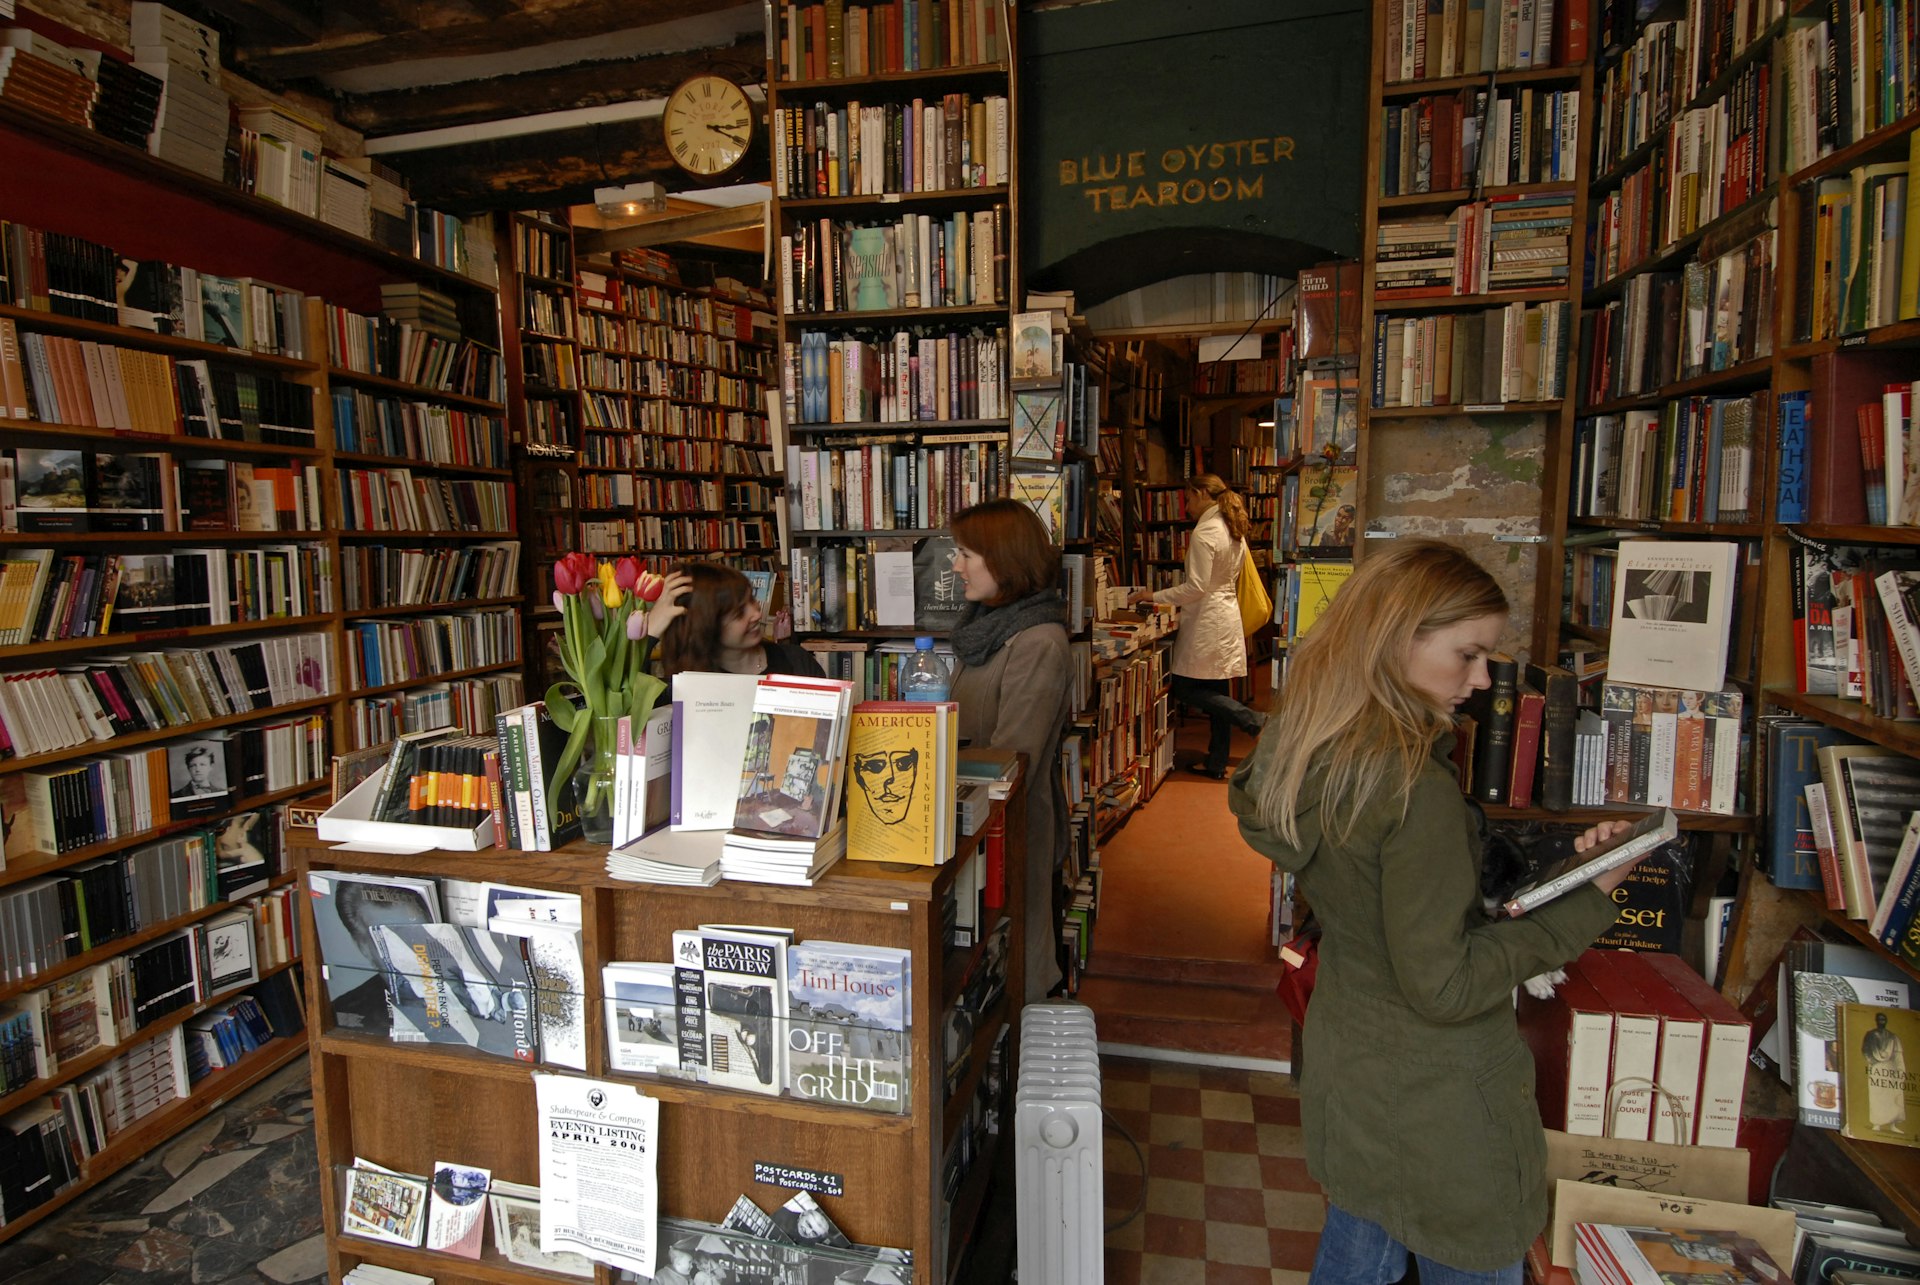 France - Tourism - The Shakespeare and Company bookstore